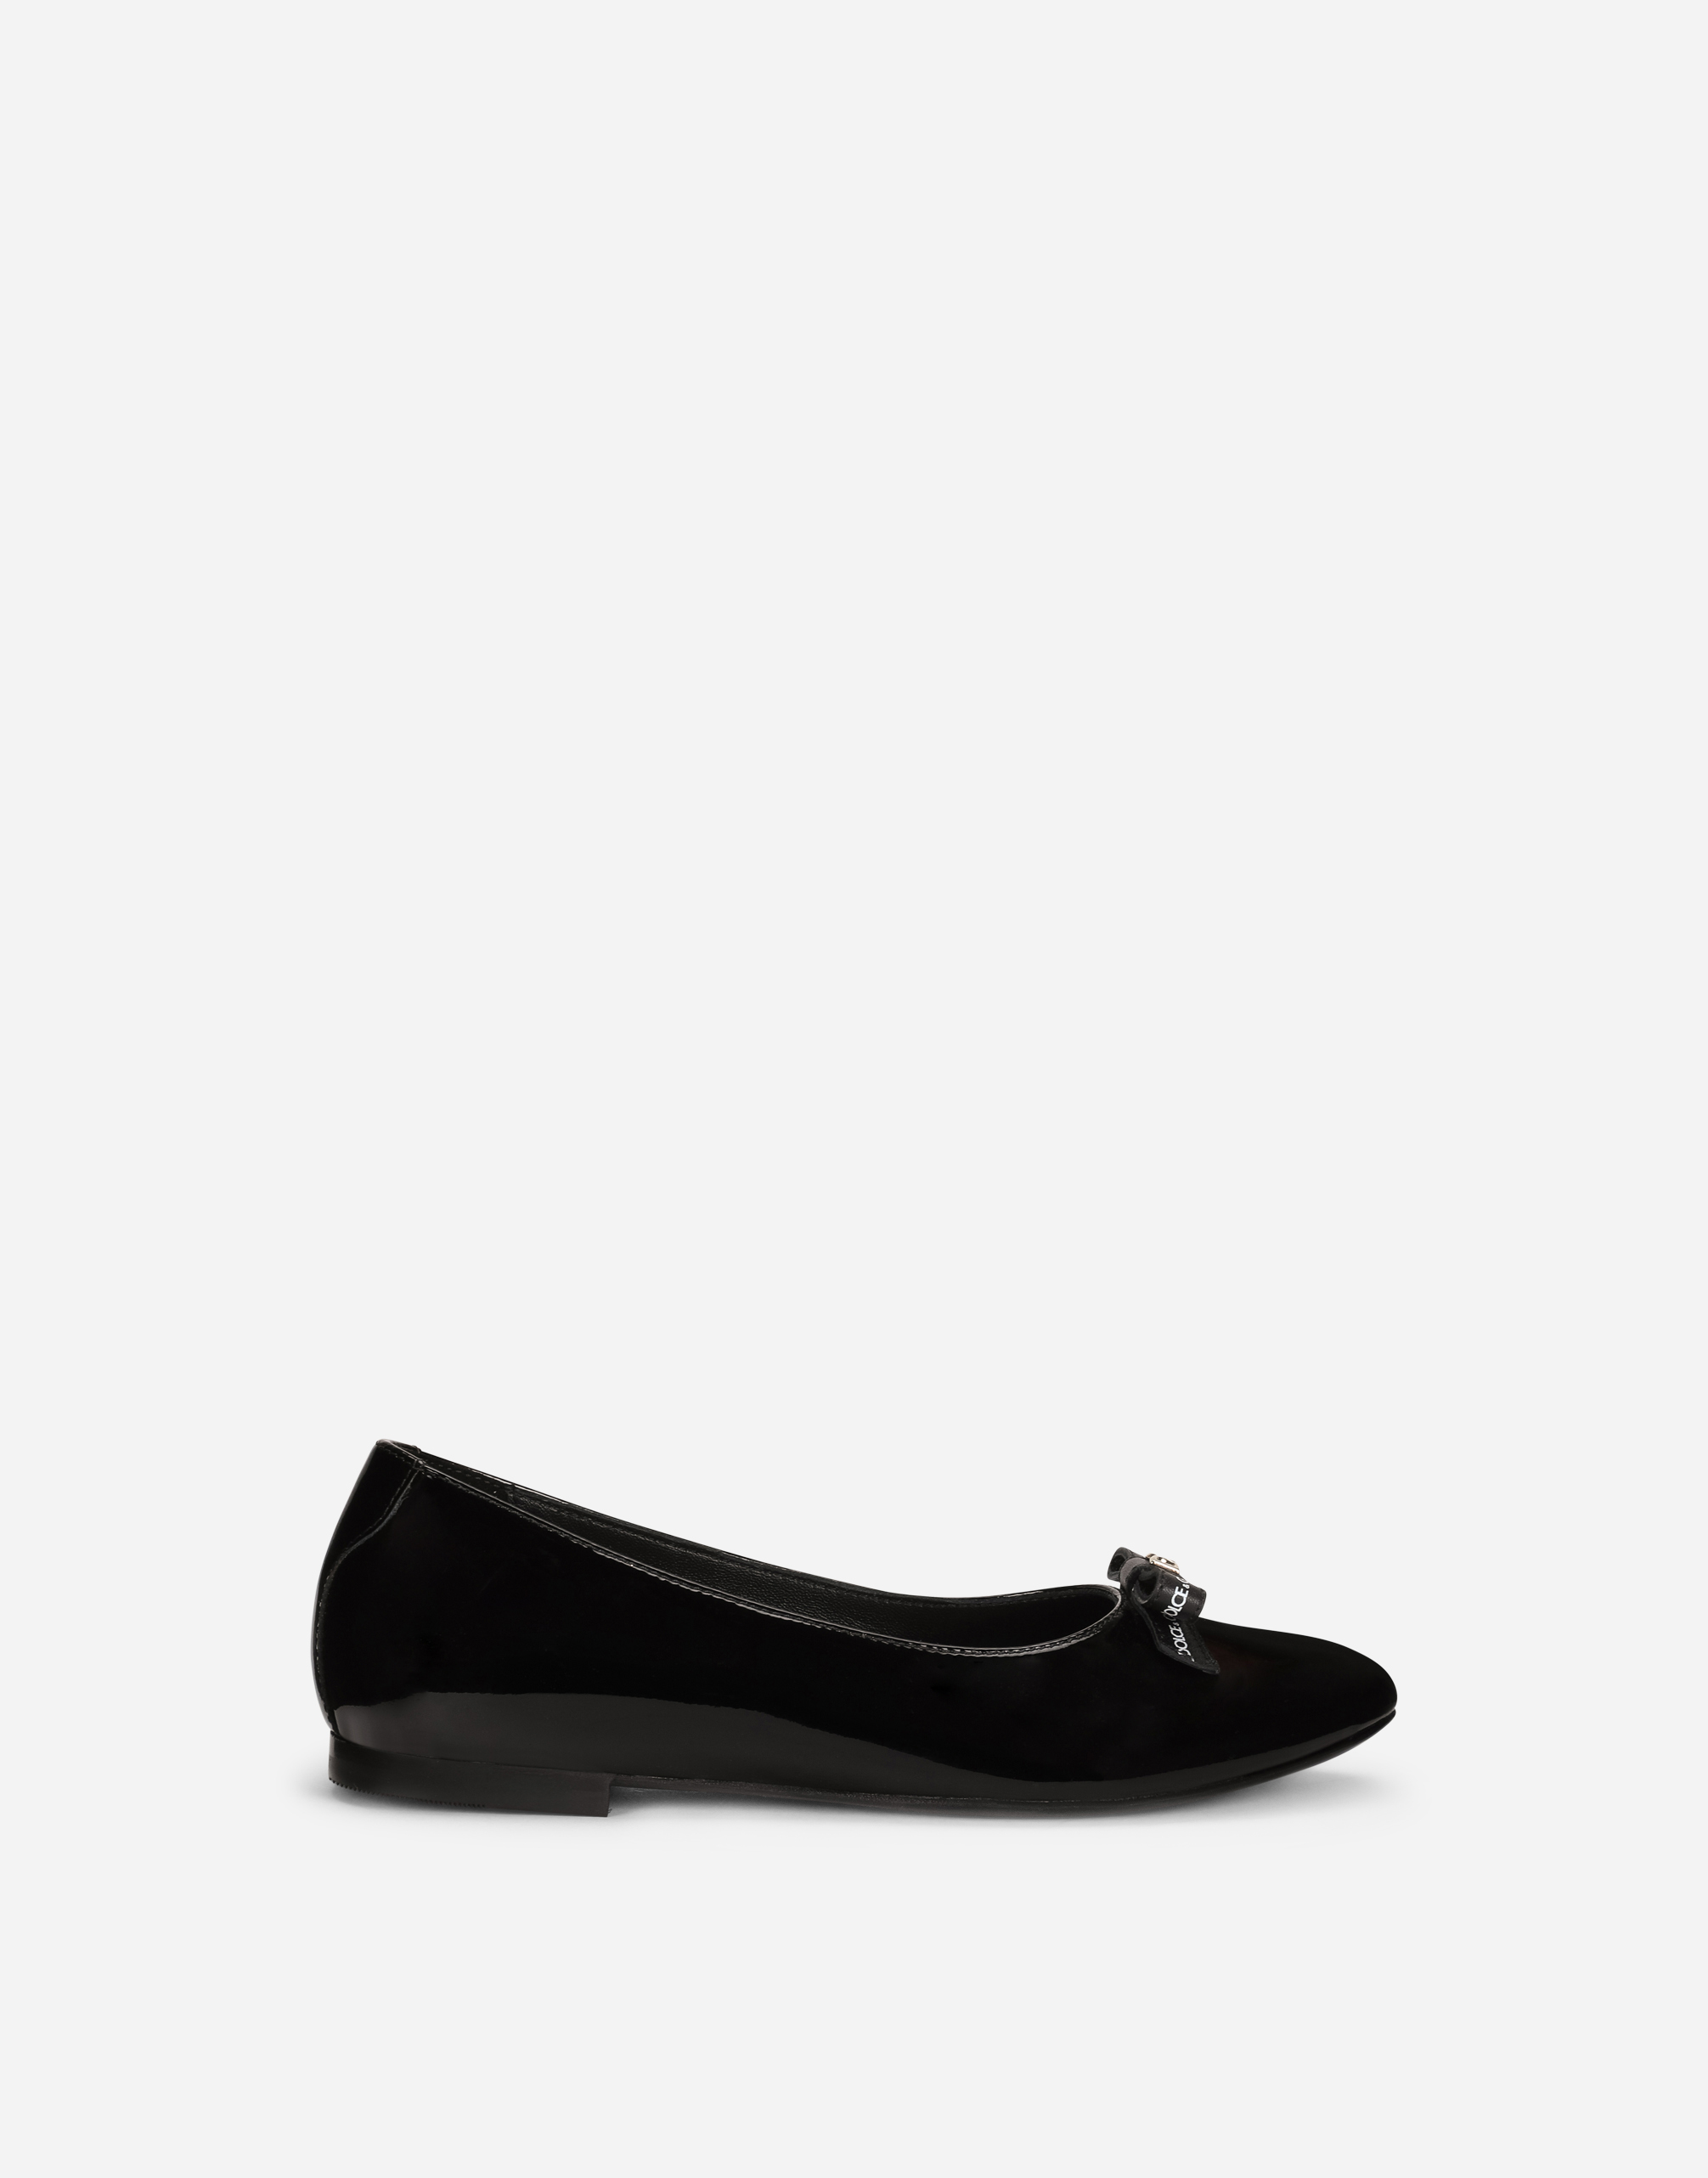 Patent leather ballet flats with bow detail in Black